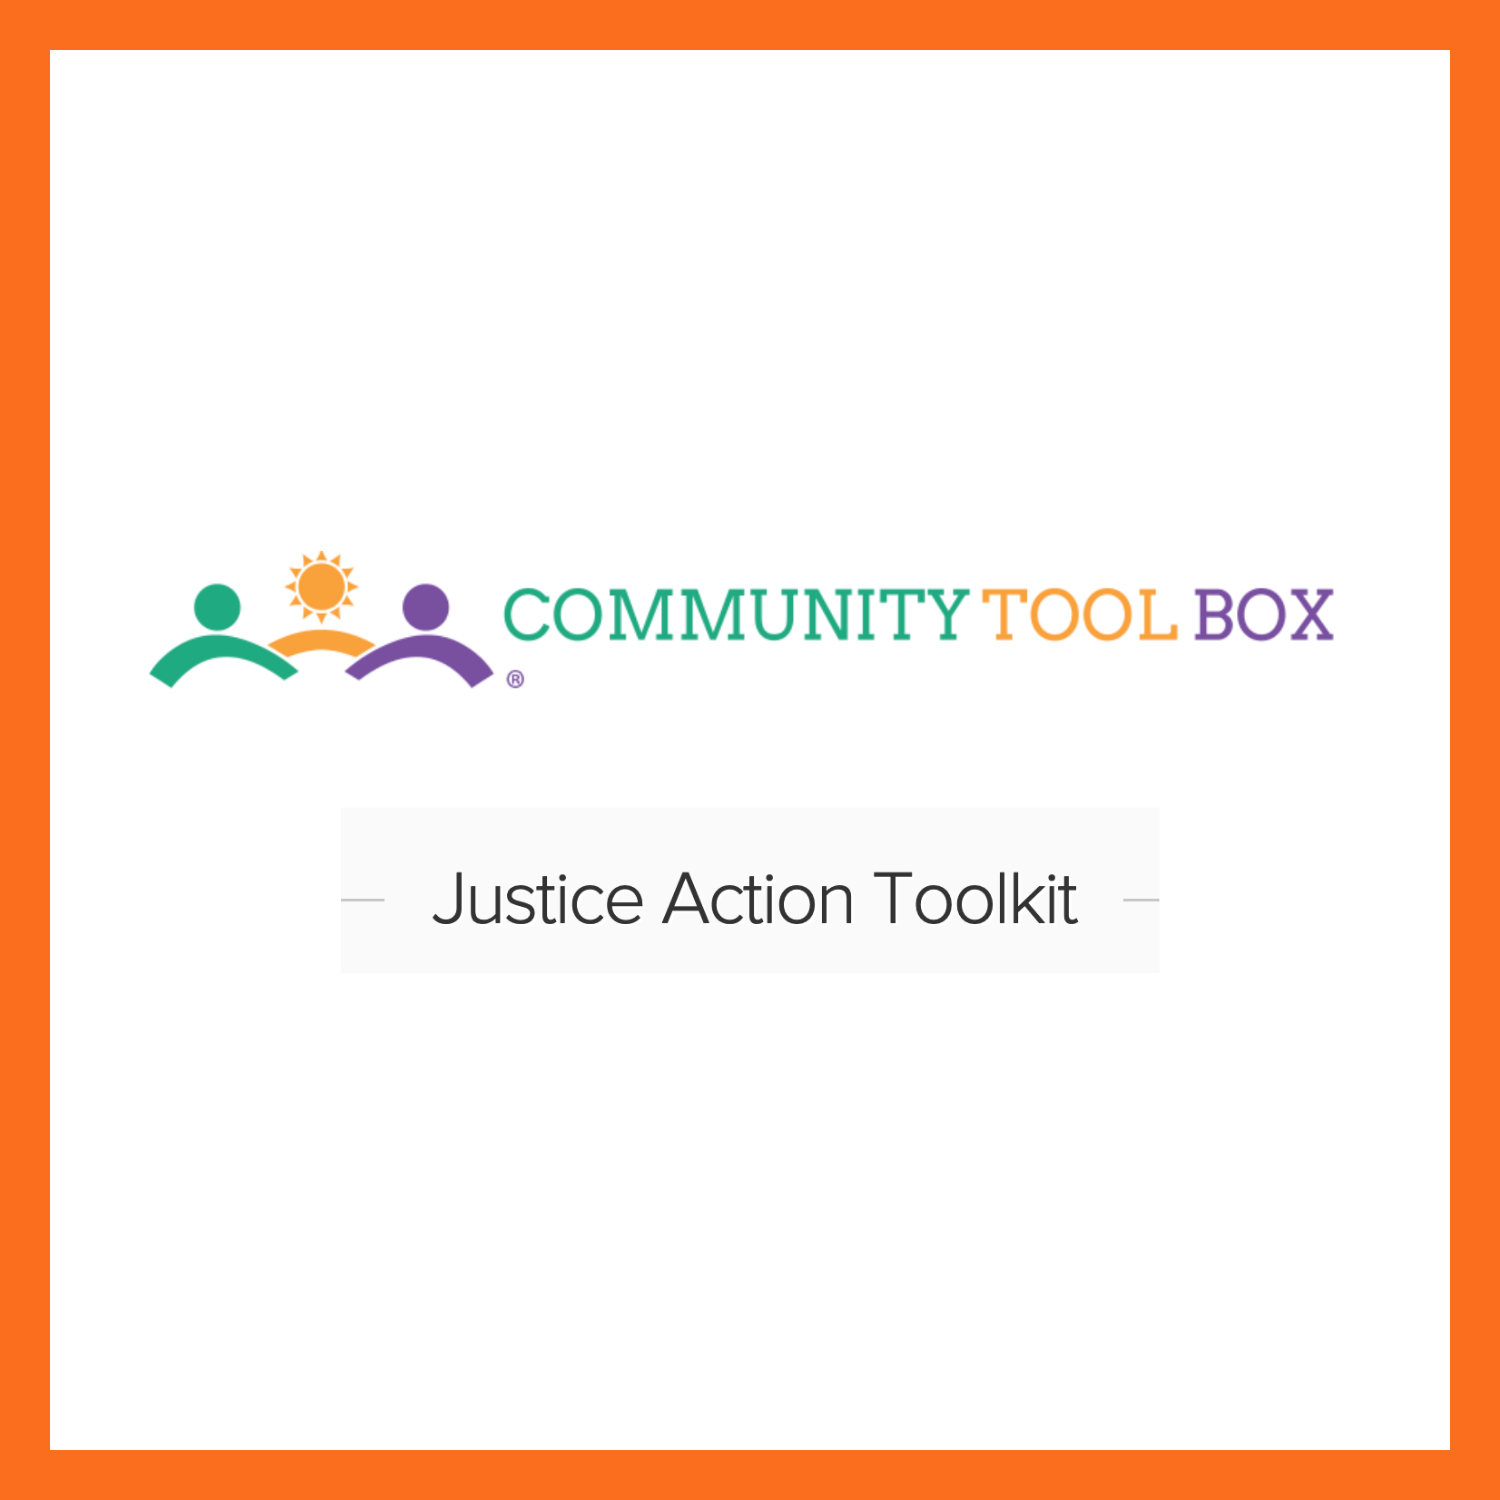 "Community Tool Box" written in green, orange, and purple with a figure of 3 people and the middle figure's head is an orange sun. Below reads "Justice Action Toolkit".